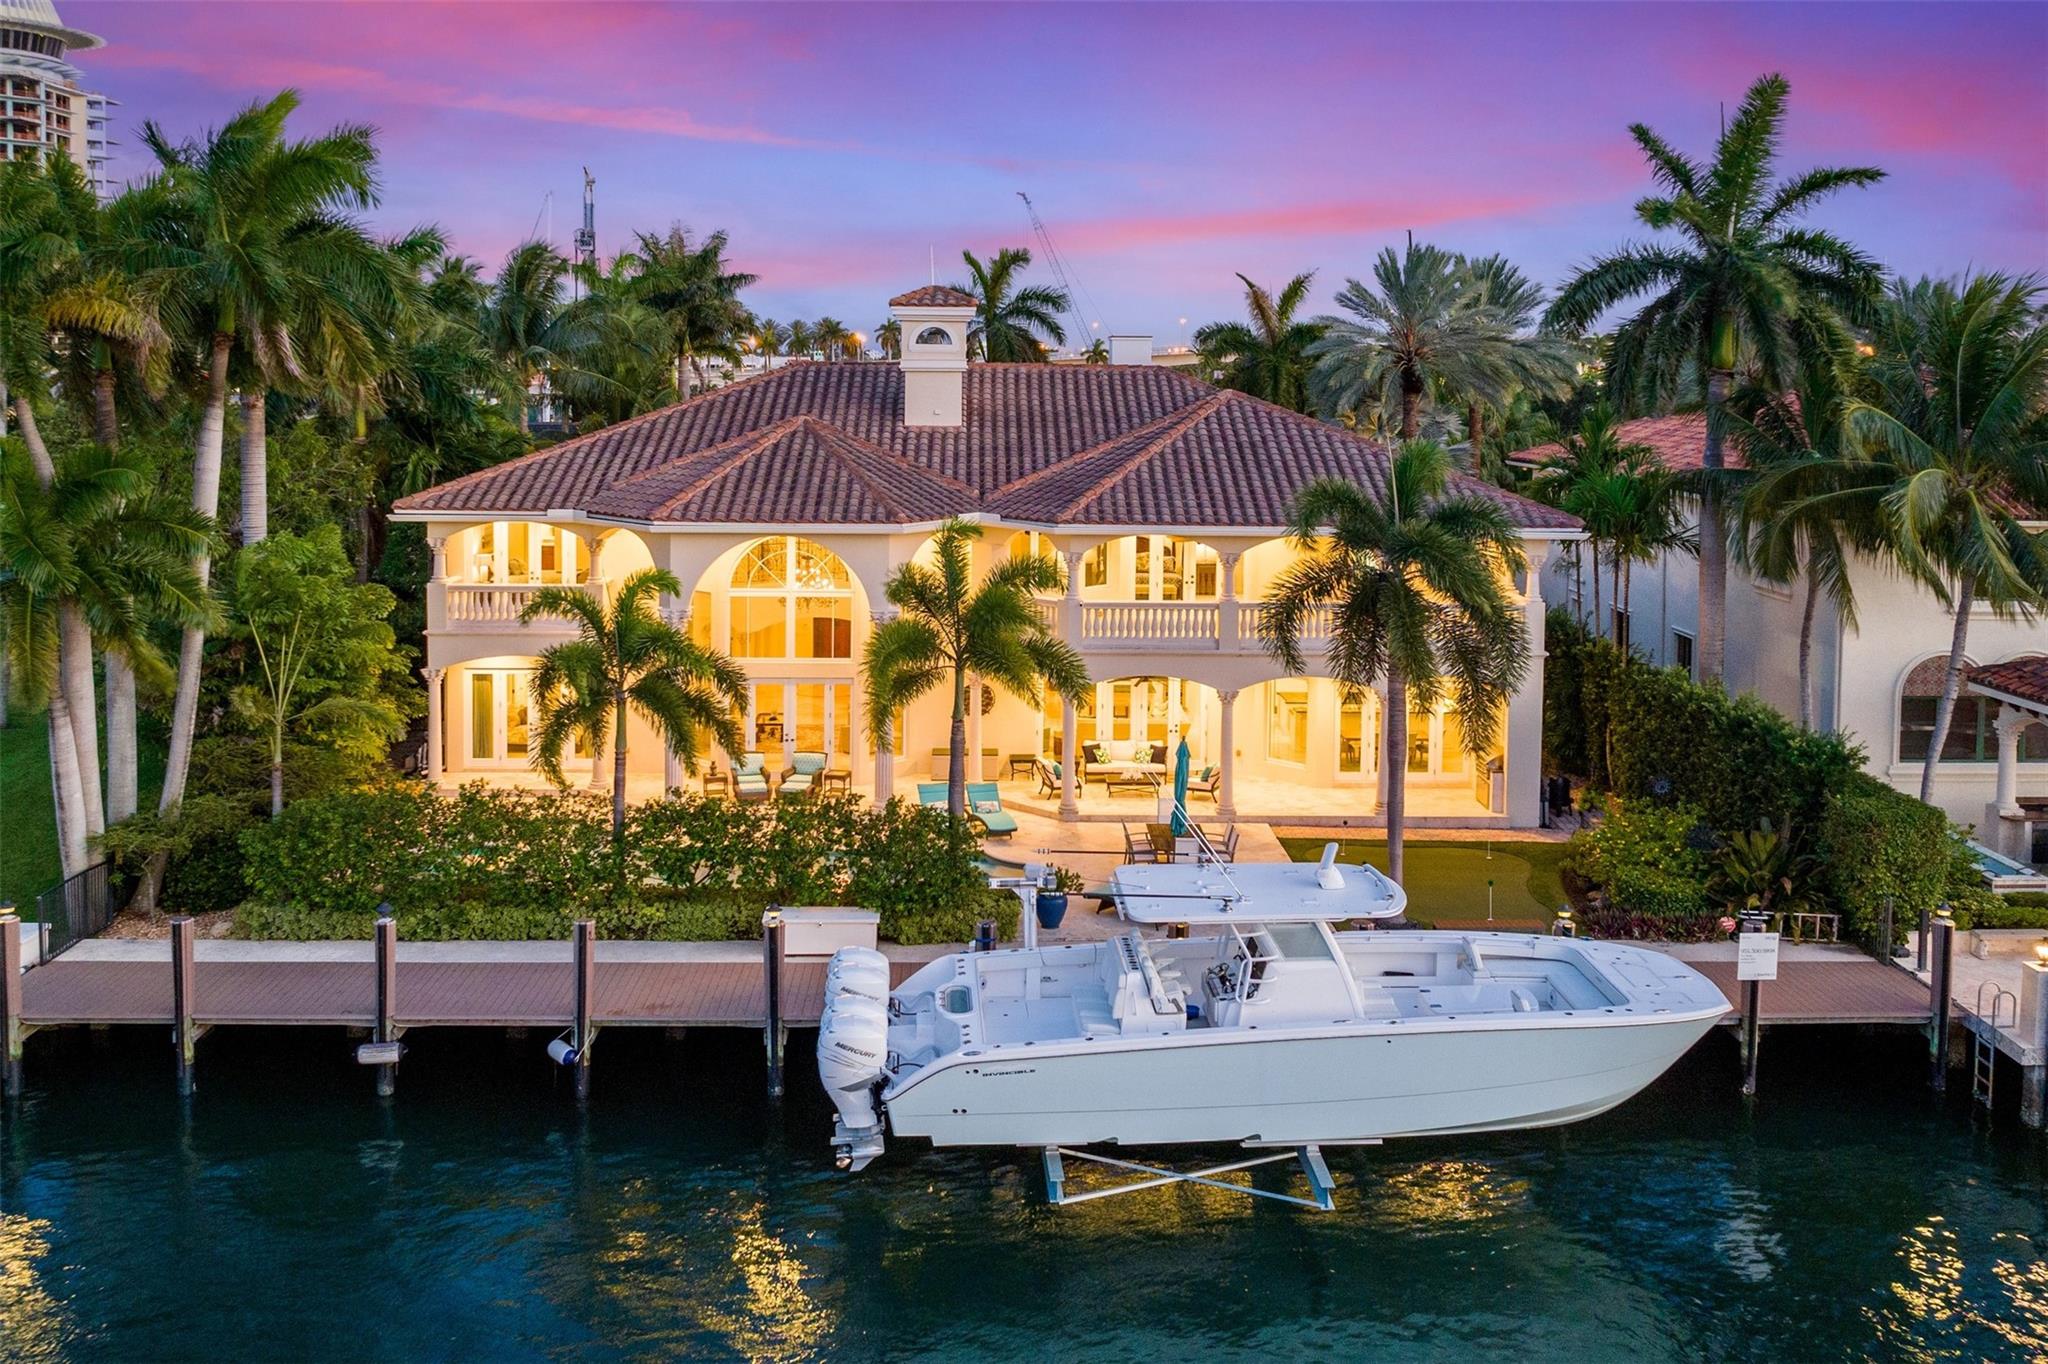 Introducing an exquisite waterfront estate nestled in the prestigious Harbor Beach gated community. This 7 bed/7.5 bath home situated just 4 homes from the Intracoastal w/ 100' WF offers quick ocean access. Inside, find a Great room w/ soaring ceilings & a grand fireplace. Updated chef's kitchen & bar seamlessly connects to family room. VIP Suite on 1st floor, oversized Primary suite, 2 junior suites + 2 en suite guest rooms provide ample accommodations. Additional office & gym. Outside, find a covered patio w/ BBQ, heated pool, hot tub, & putting green. Recently installed 20Klb lift, new dock, upgraded AC's, & new wood flooring throughout. Private HB Beach Club membership available. Just minutes away from the beach, dining, & FTL airport. Experience the epitome of waterfront living!